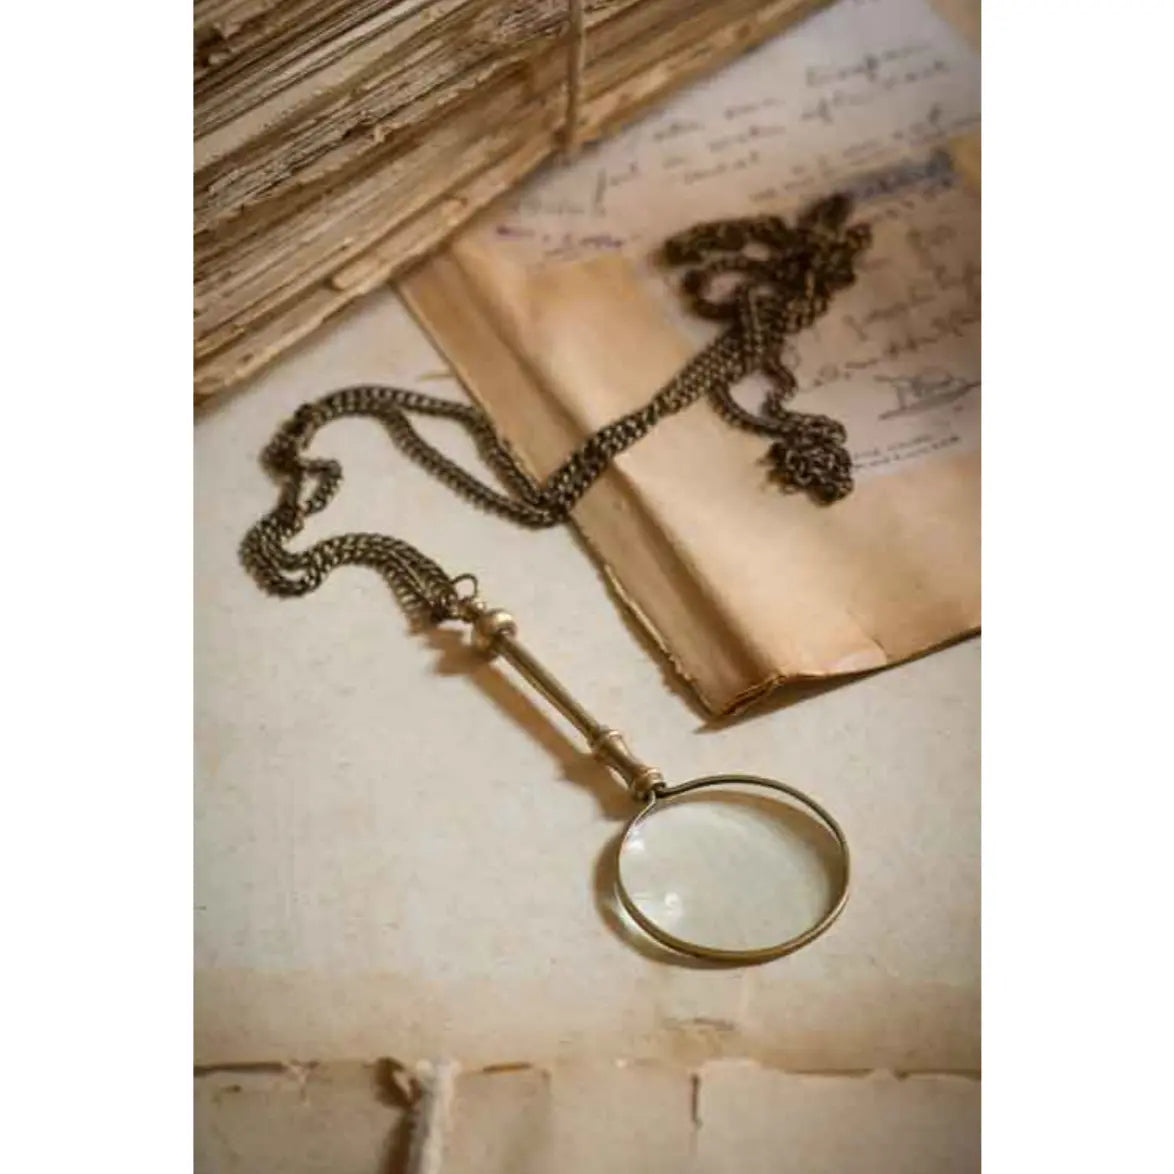 Home Smith Antiqued Brass Magnifying Glass with Chain Vagabond Vintage Decorative Object